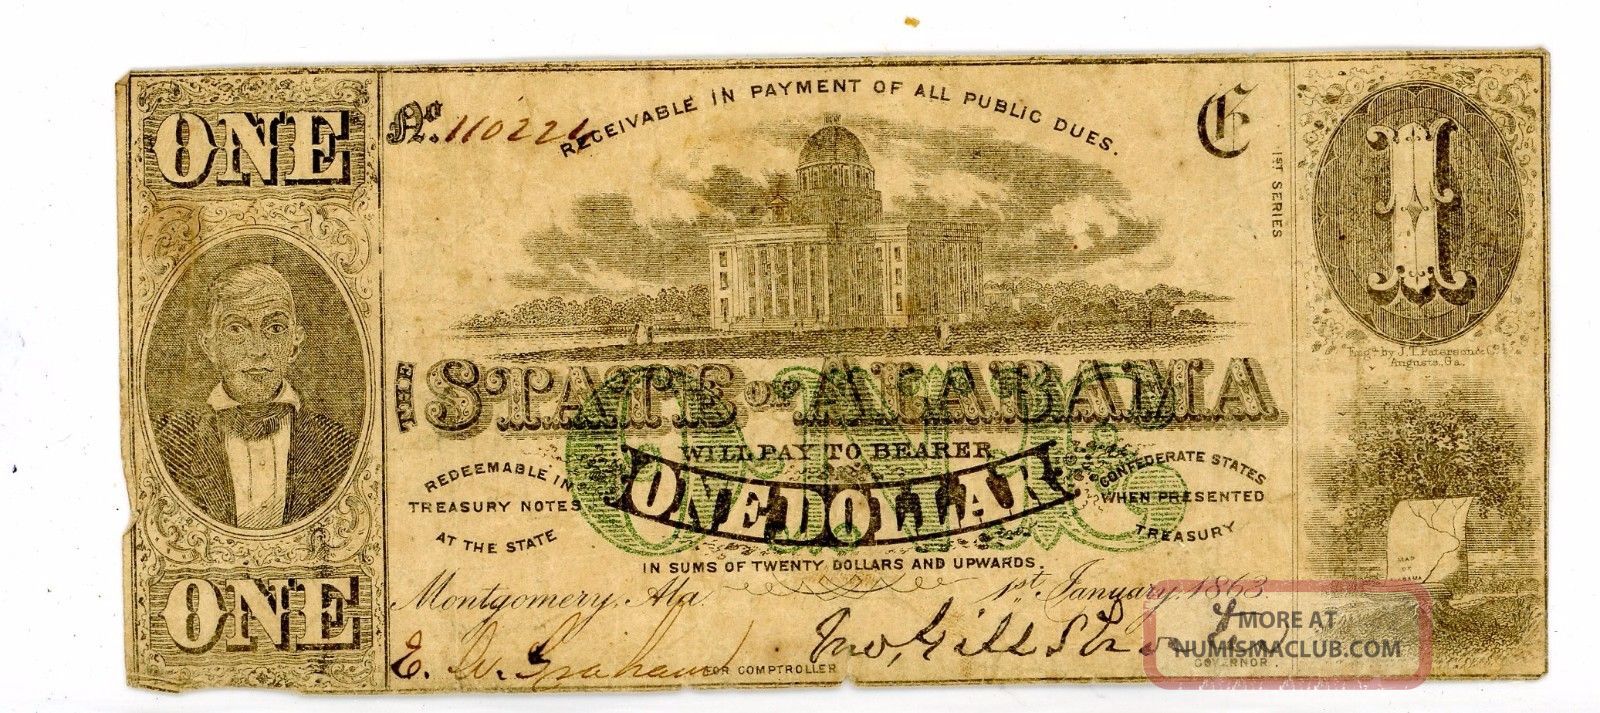 State Of Alabama $1 One Dollar Civil War Era Confederate Currency Note 1863 Paper Money: US photo